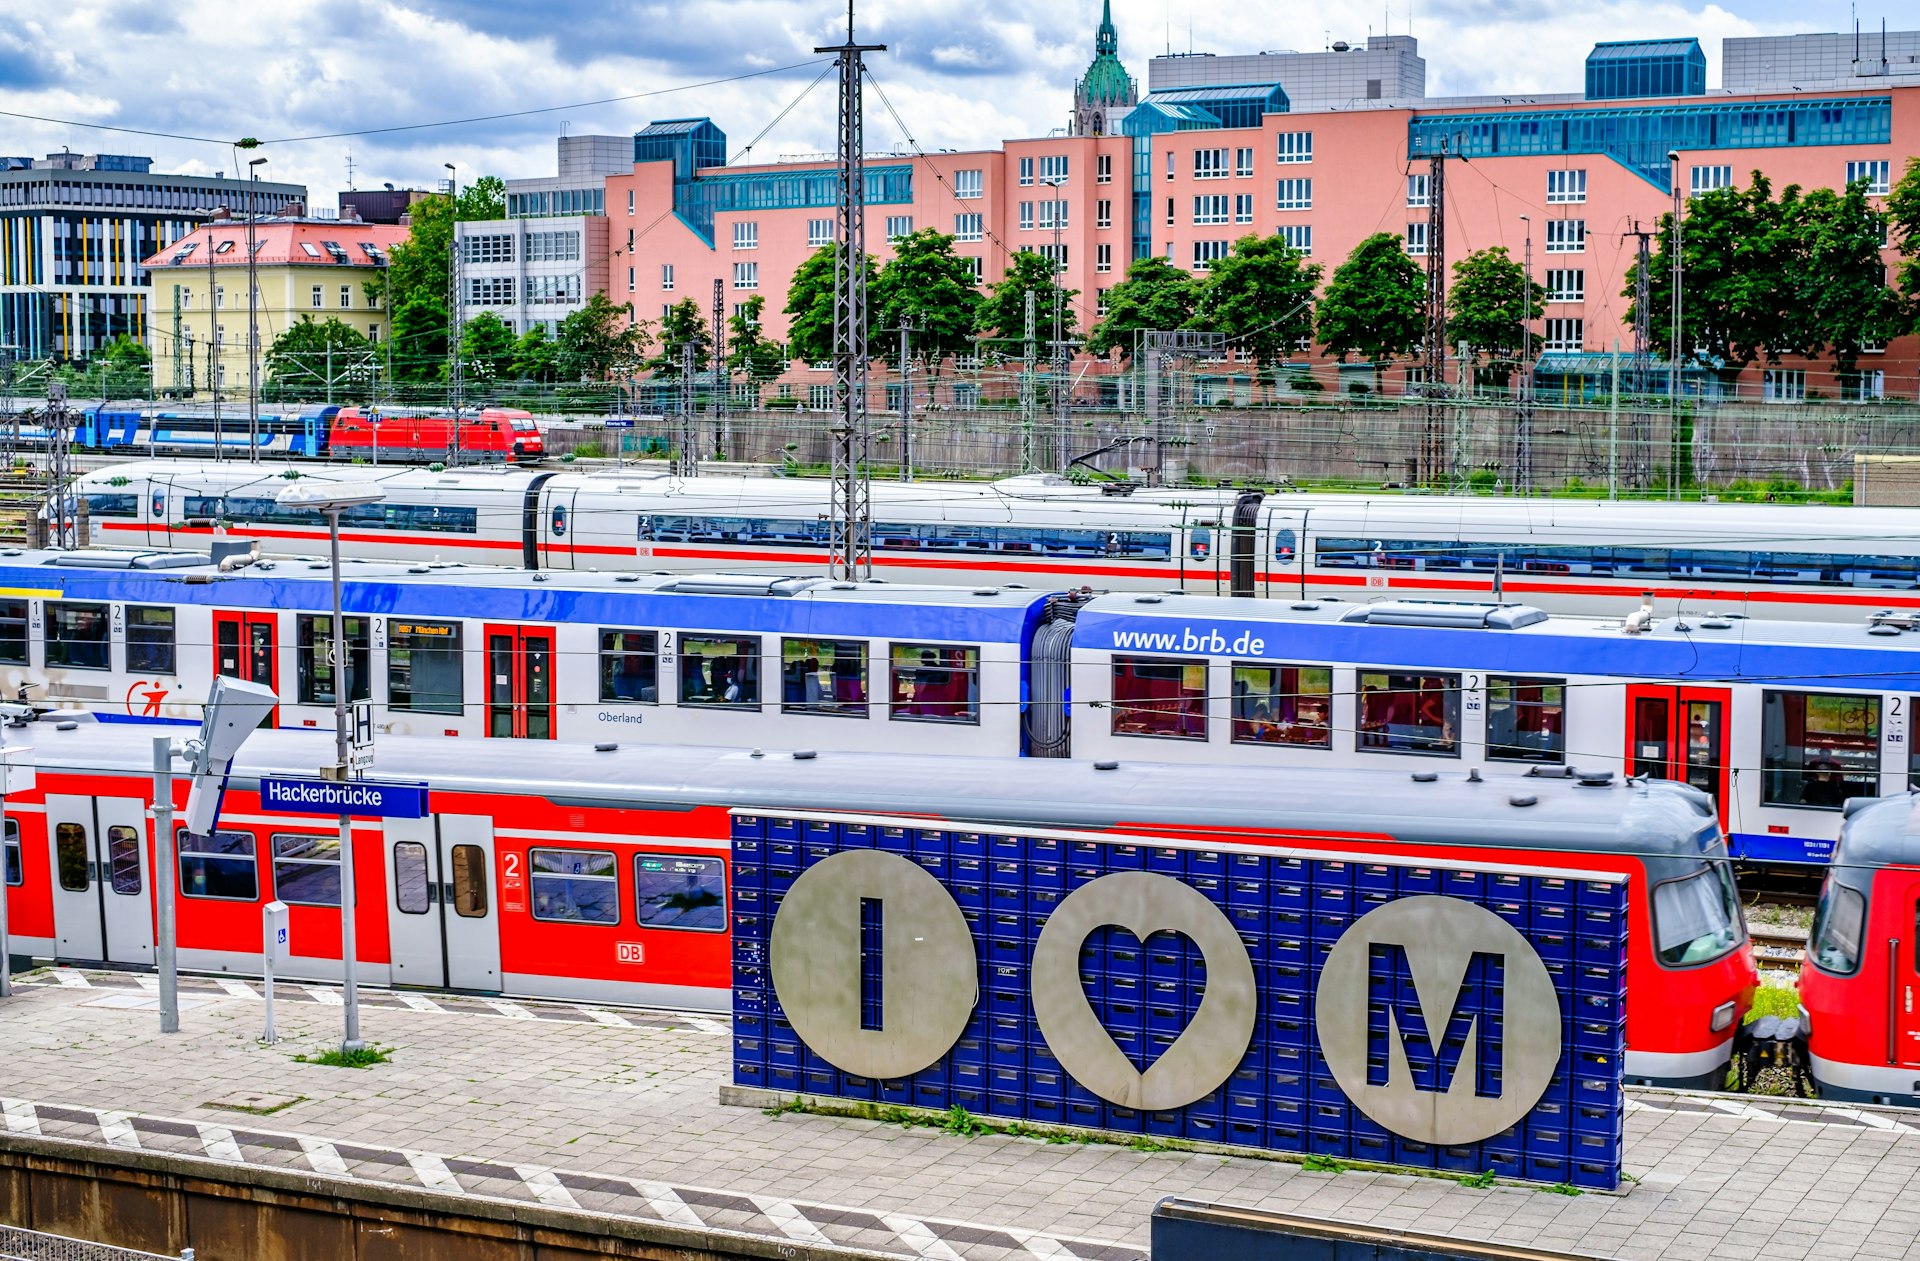 A sign saying "I heart M" at a busy train station